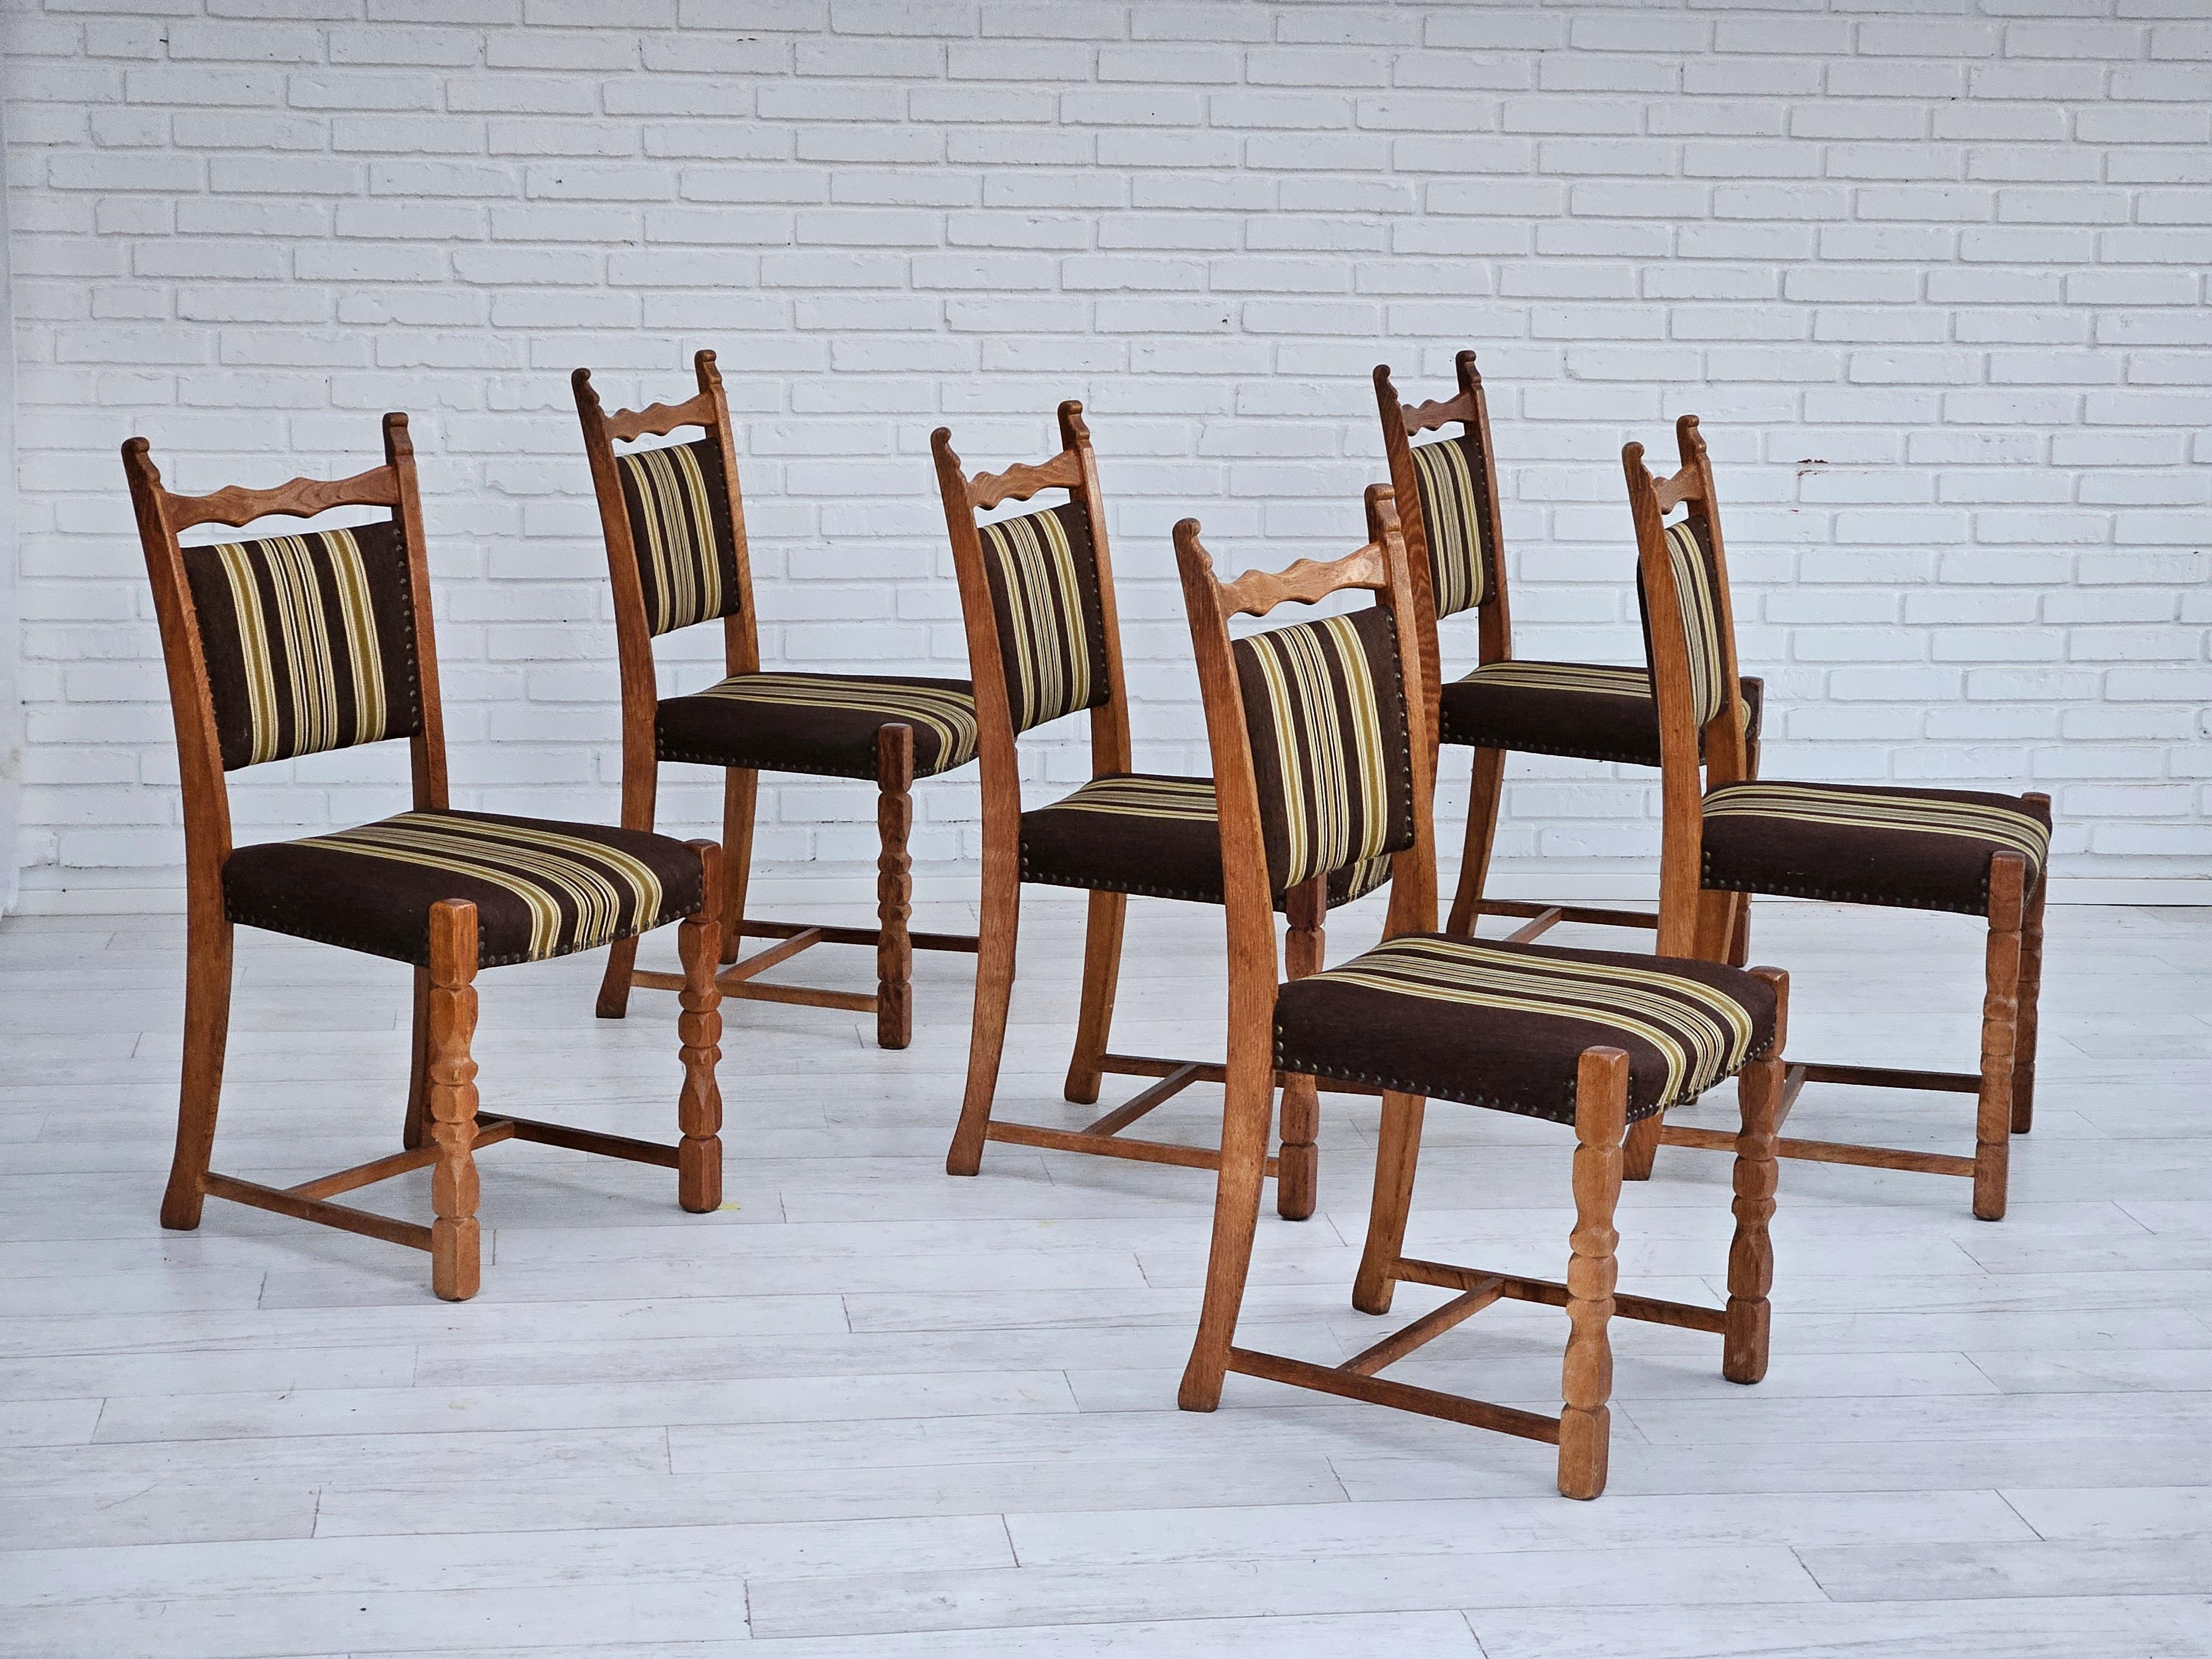 1970s, set of 6 pcs Danish dining chairs. Original very good condition: no smells and no stains. Furniture wool fabric, oak wood. Manufactured by Danish furniture manufacturer in about 1970s.